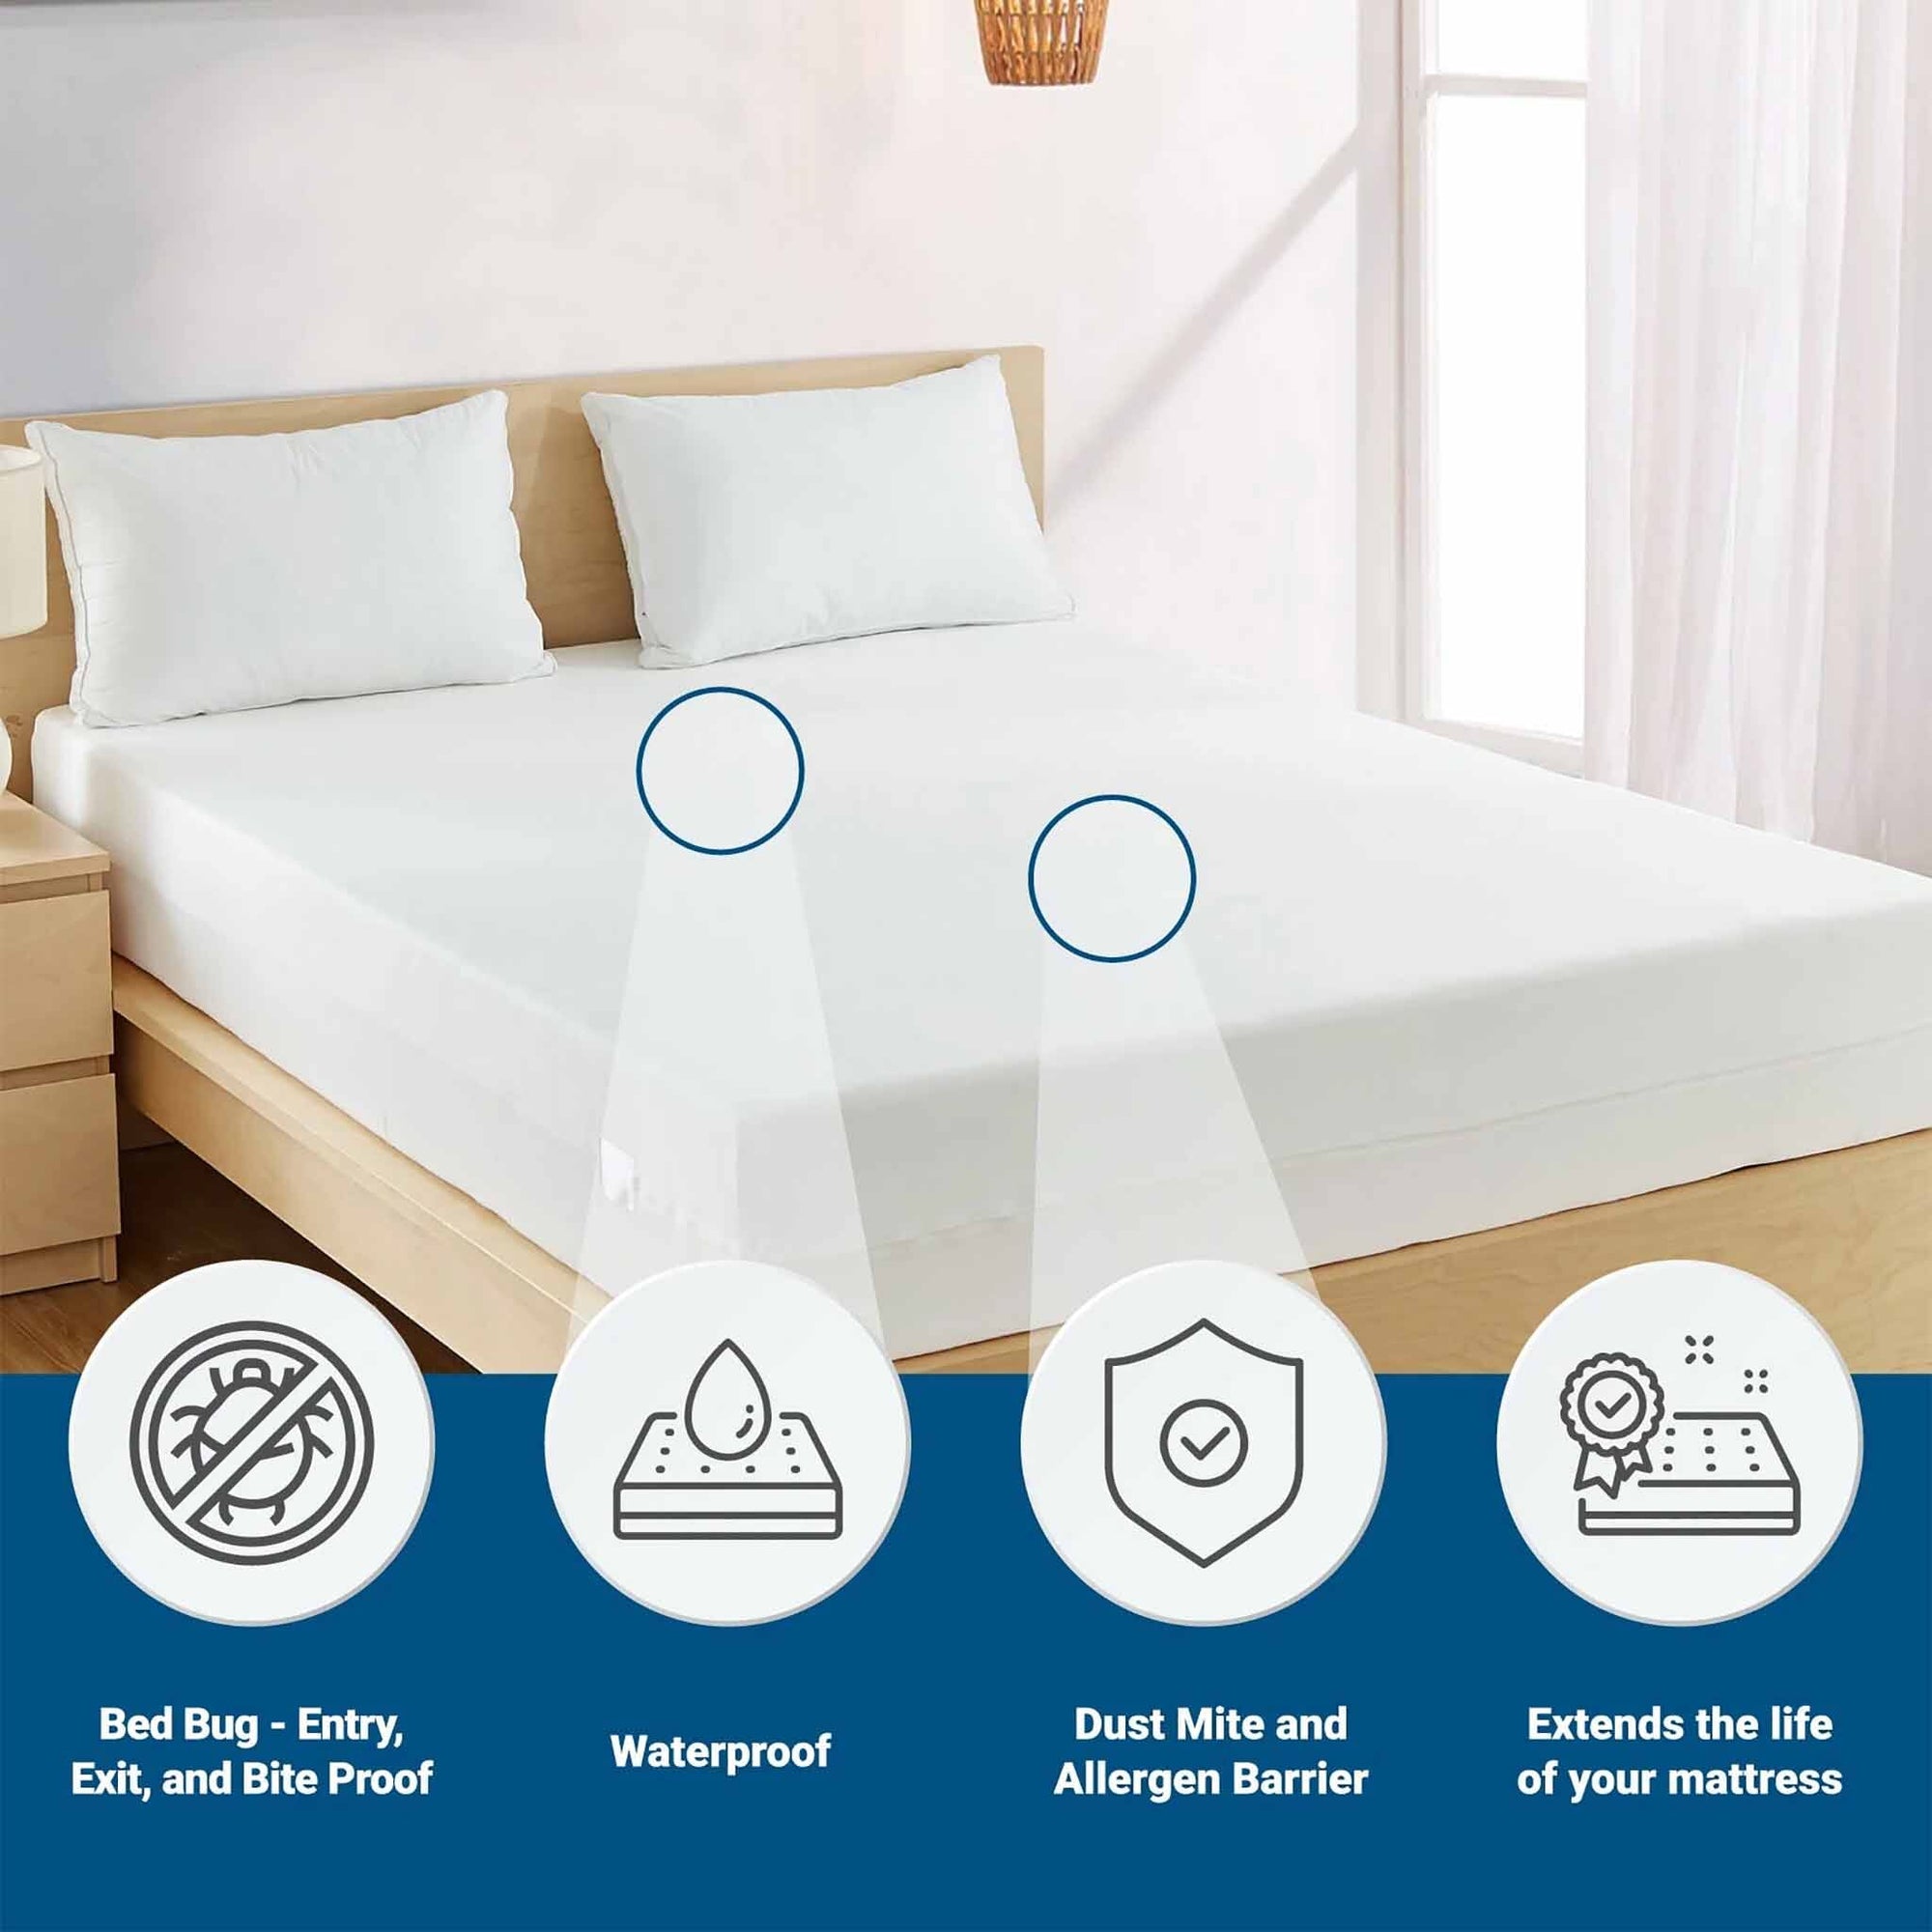 Our encasement has been certified bedbug-proof and lab tested to ensure its effectiveness against dust mites and allergens, providing you with the ultimate protection and peace of mind.